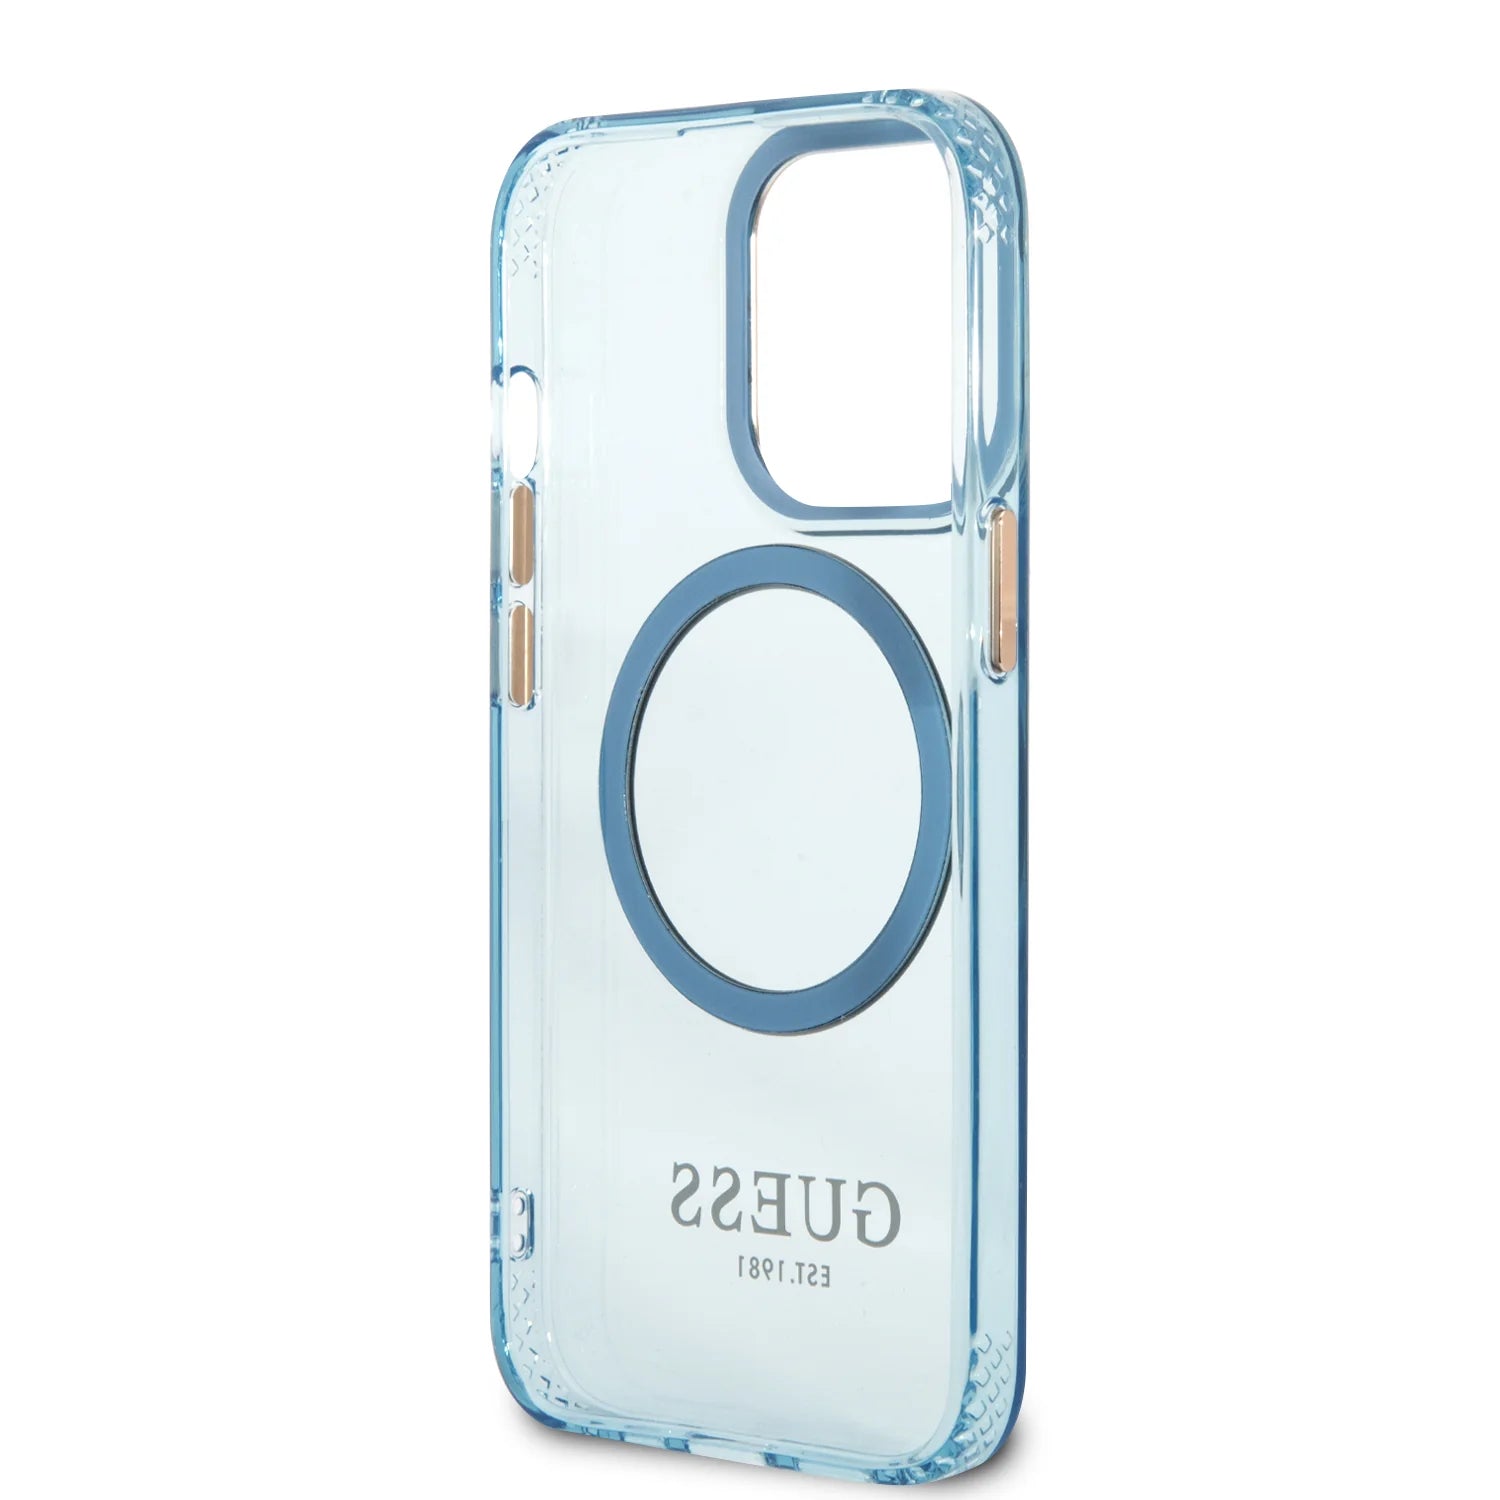 CG Mobile Guess iPhone 13 Pro Max Hard Case - Clear